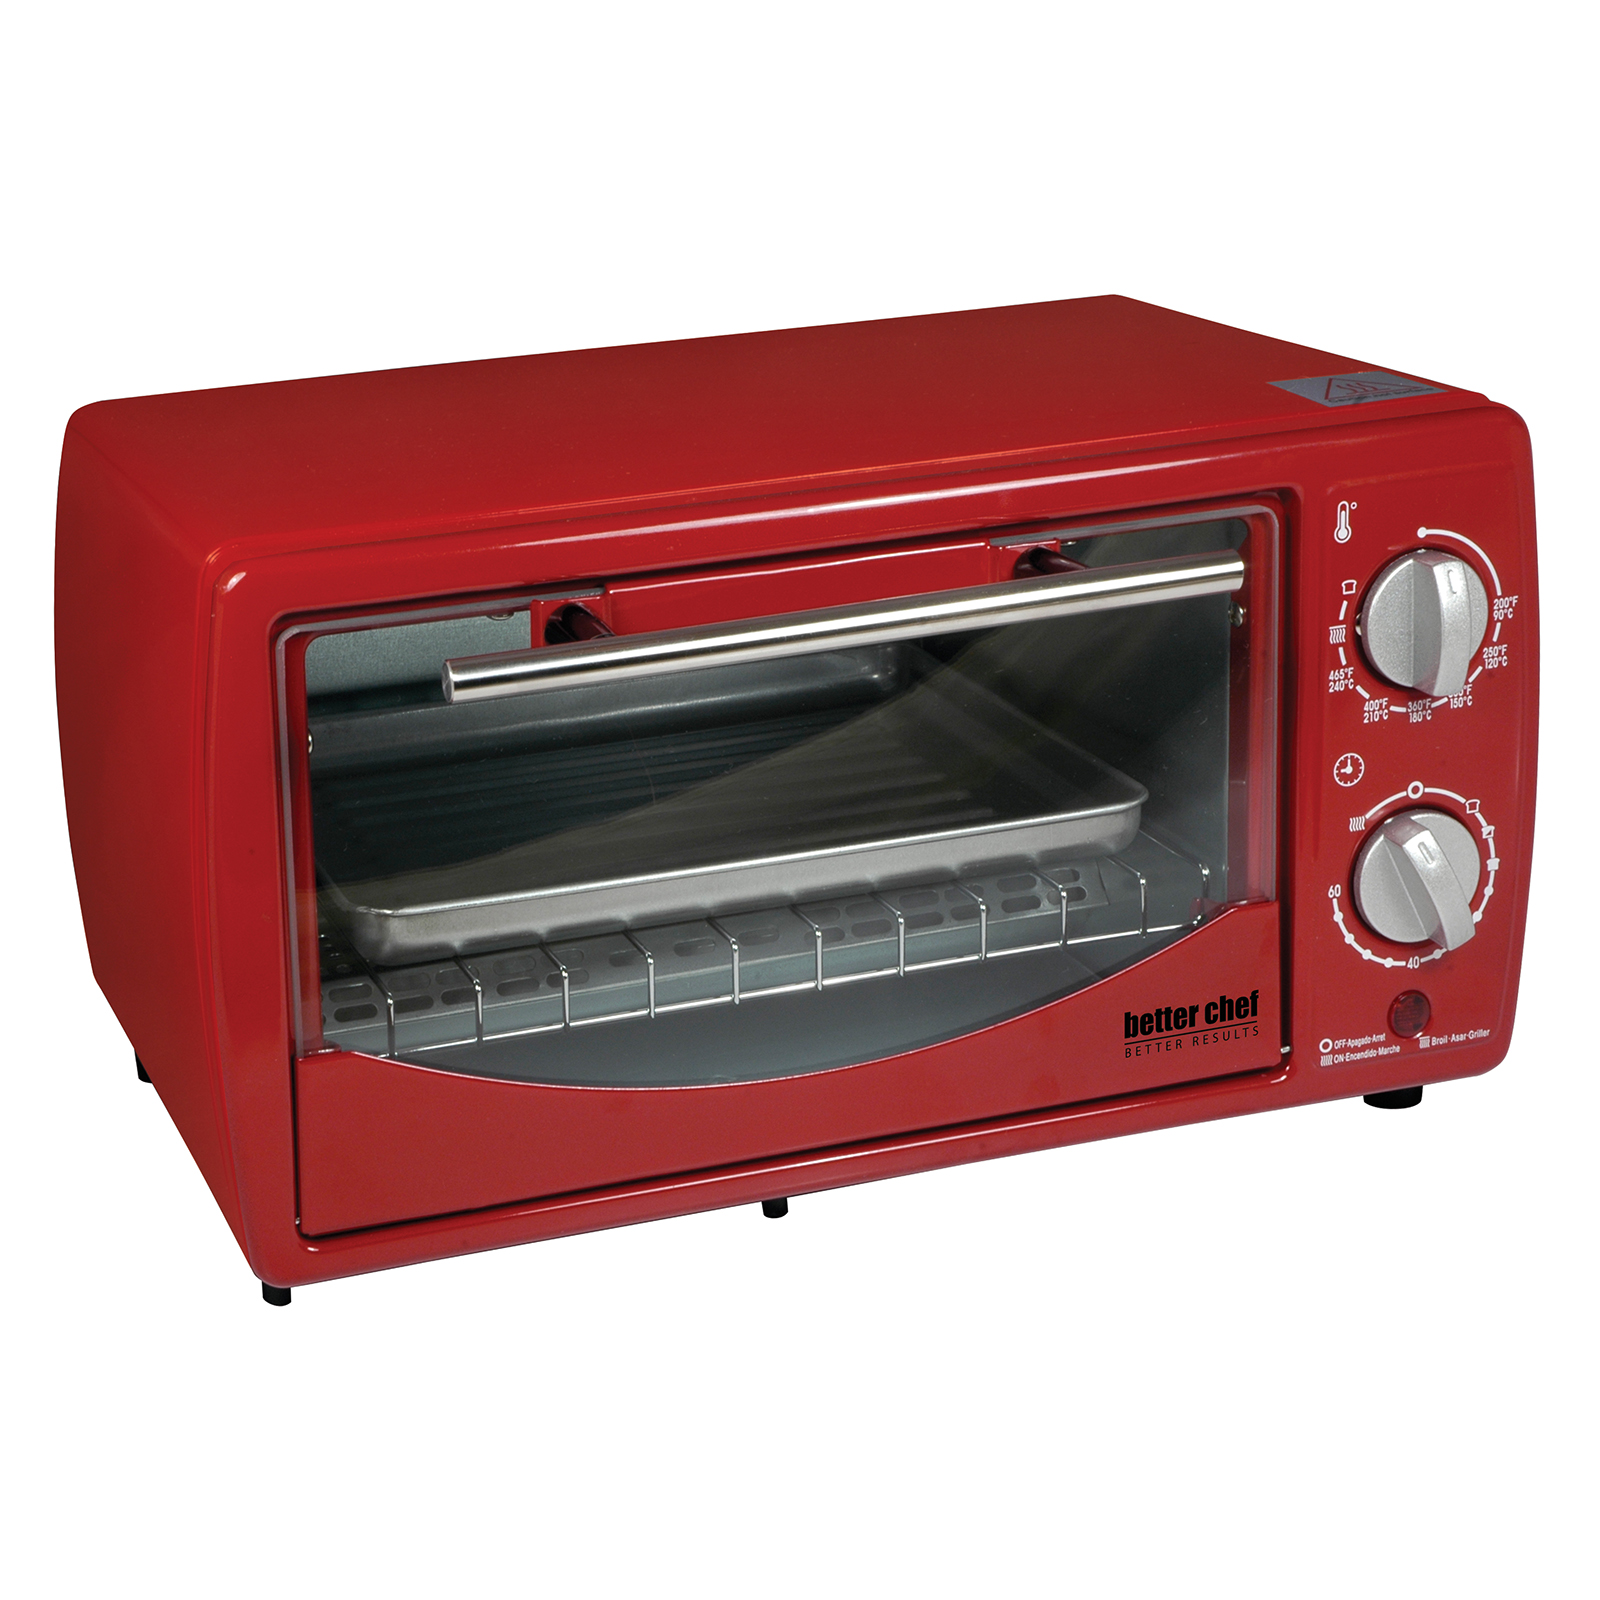 Better Chef 97096707M 4-Slice Toaster Oven - Red